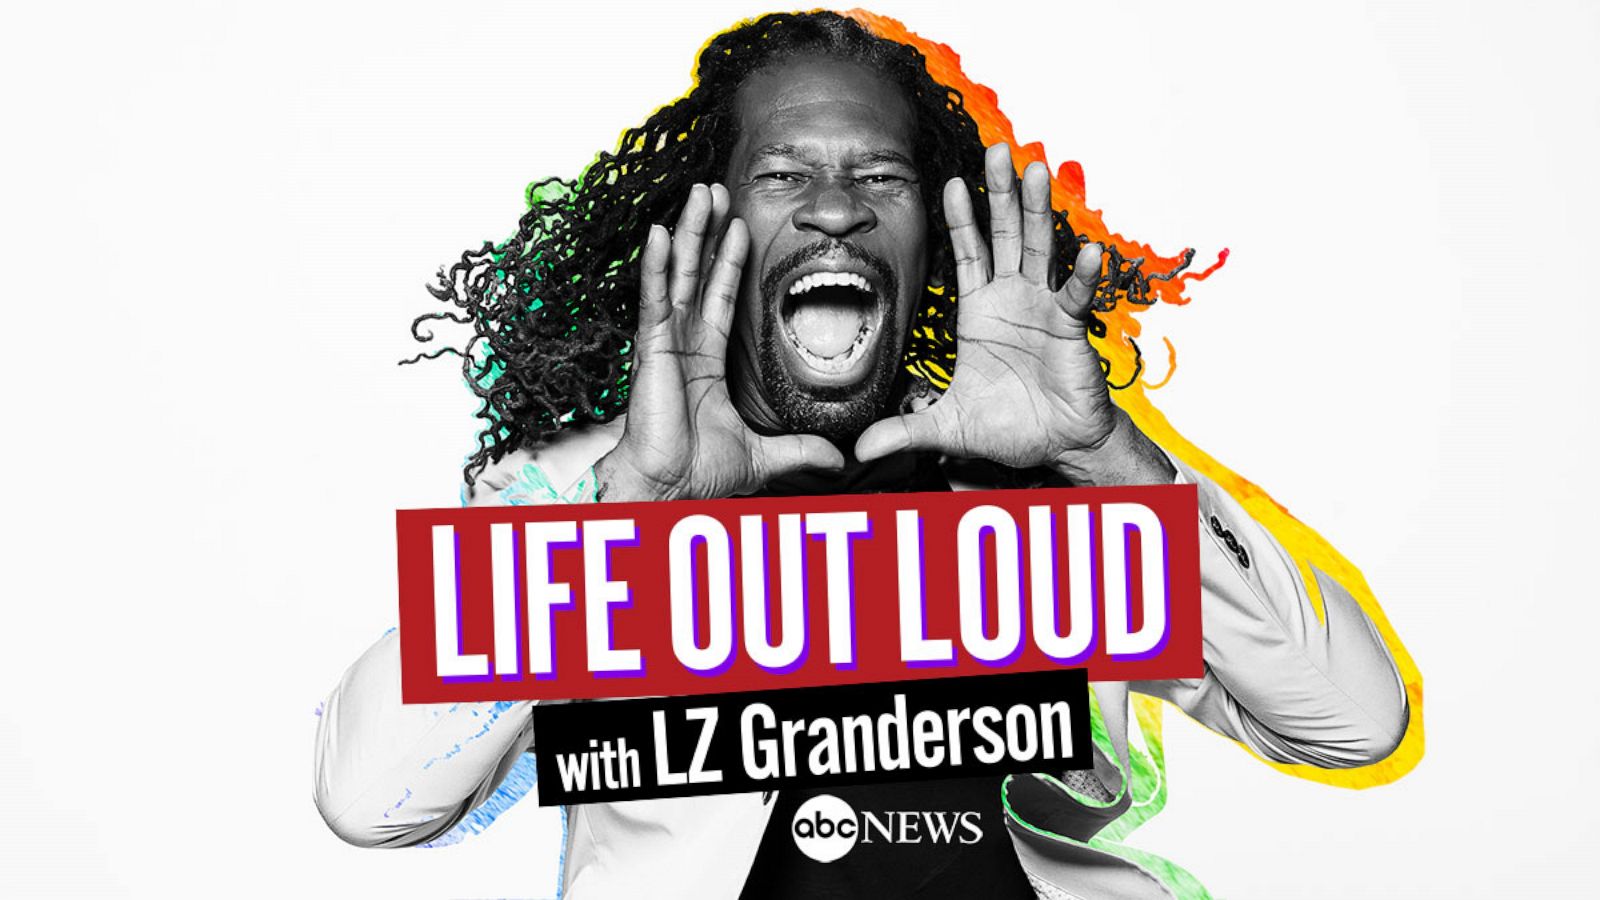 LZ Granderson, host of Life Out Loud Why we need Pride more than ever